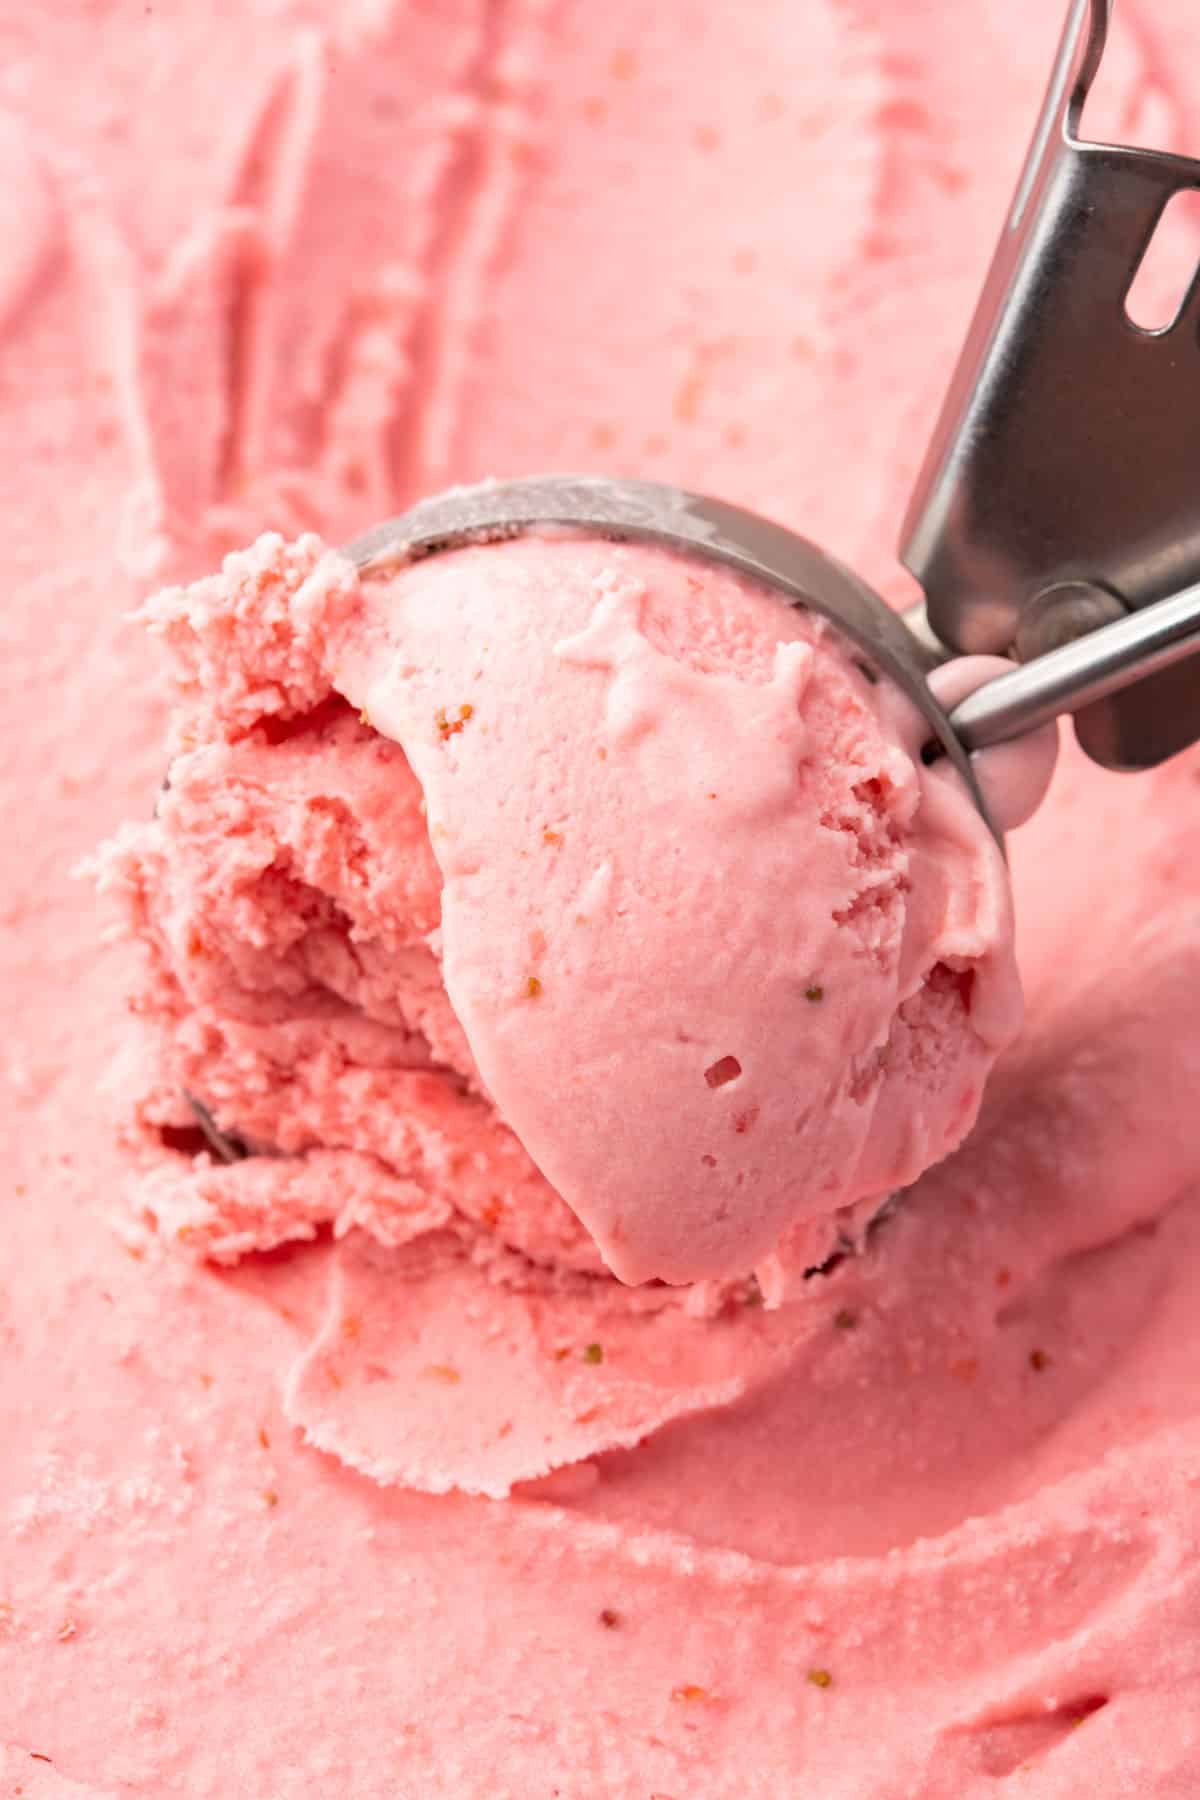 An ice cream scooper scooping strawberry ice cream from a tub.